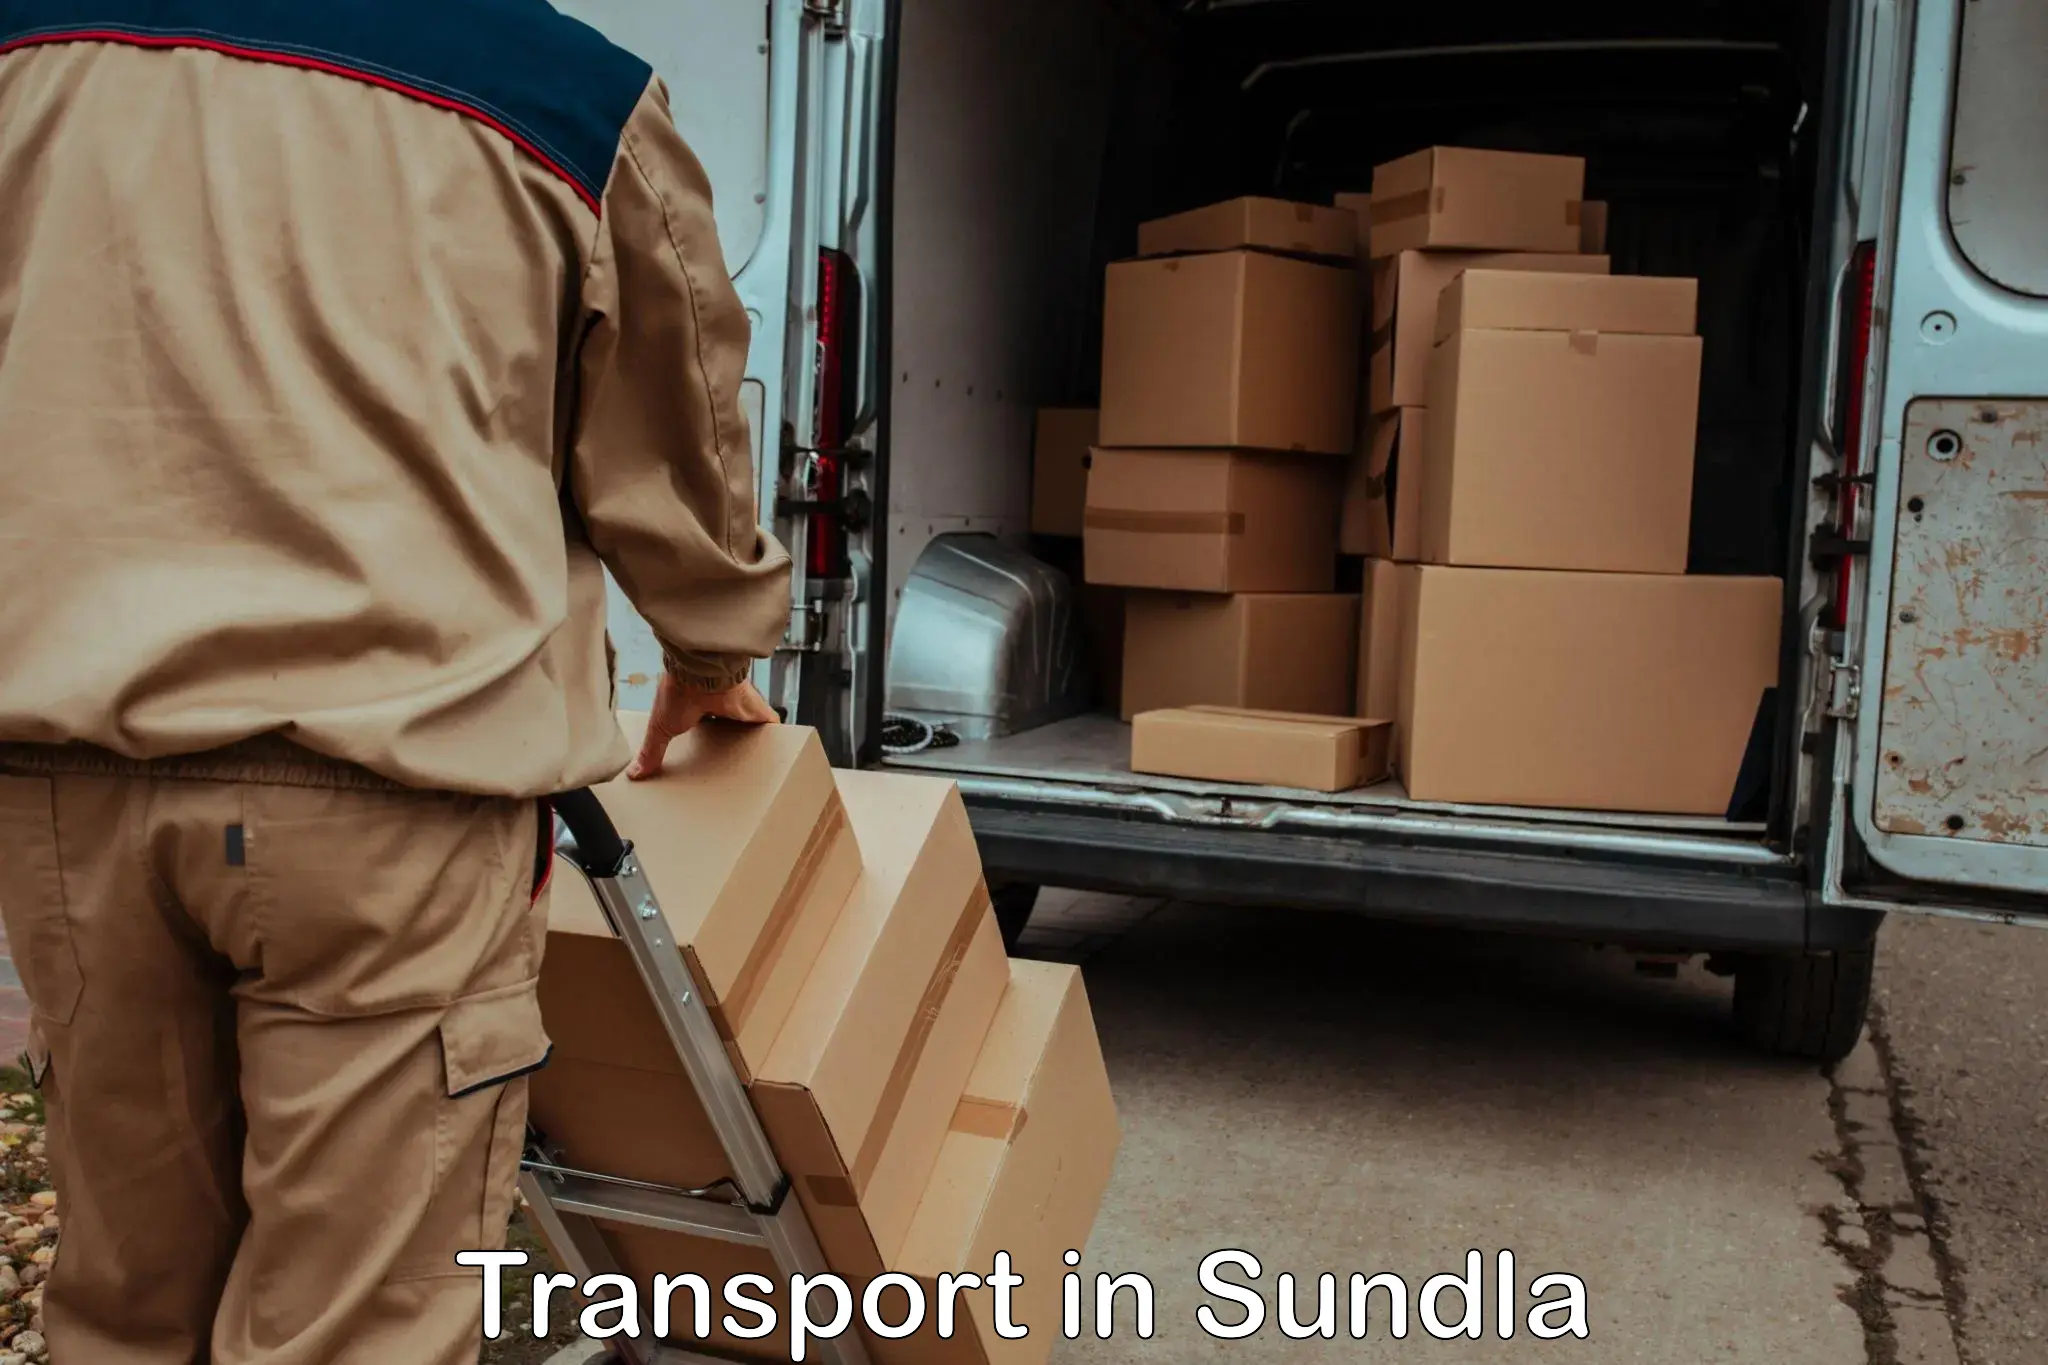 Air freight transport services in Sundla